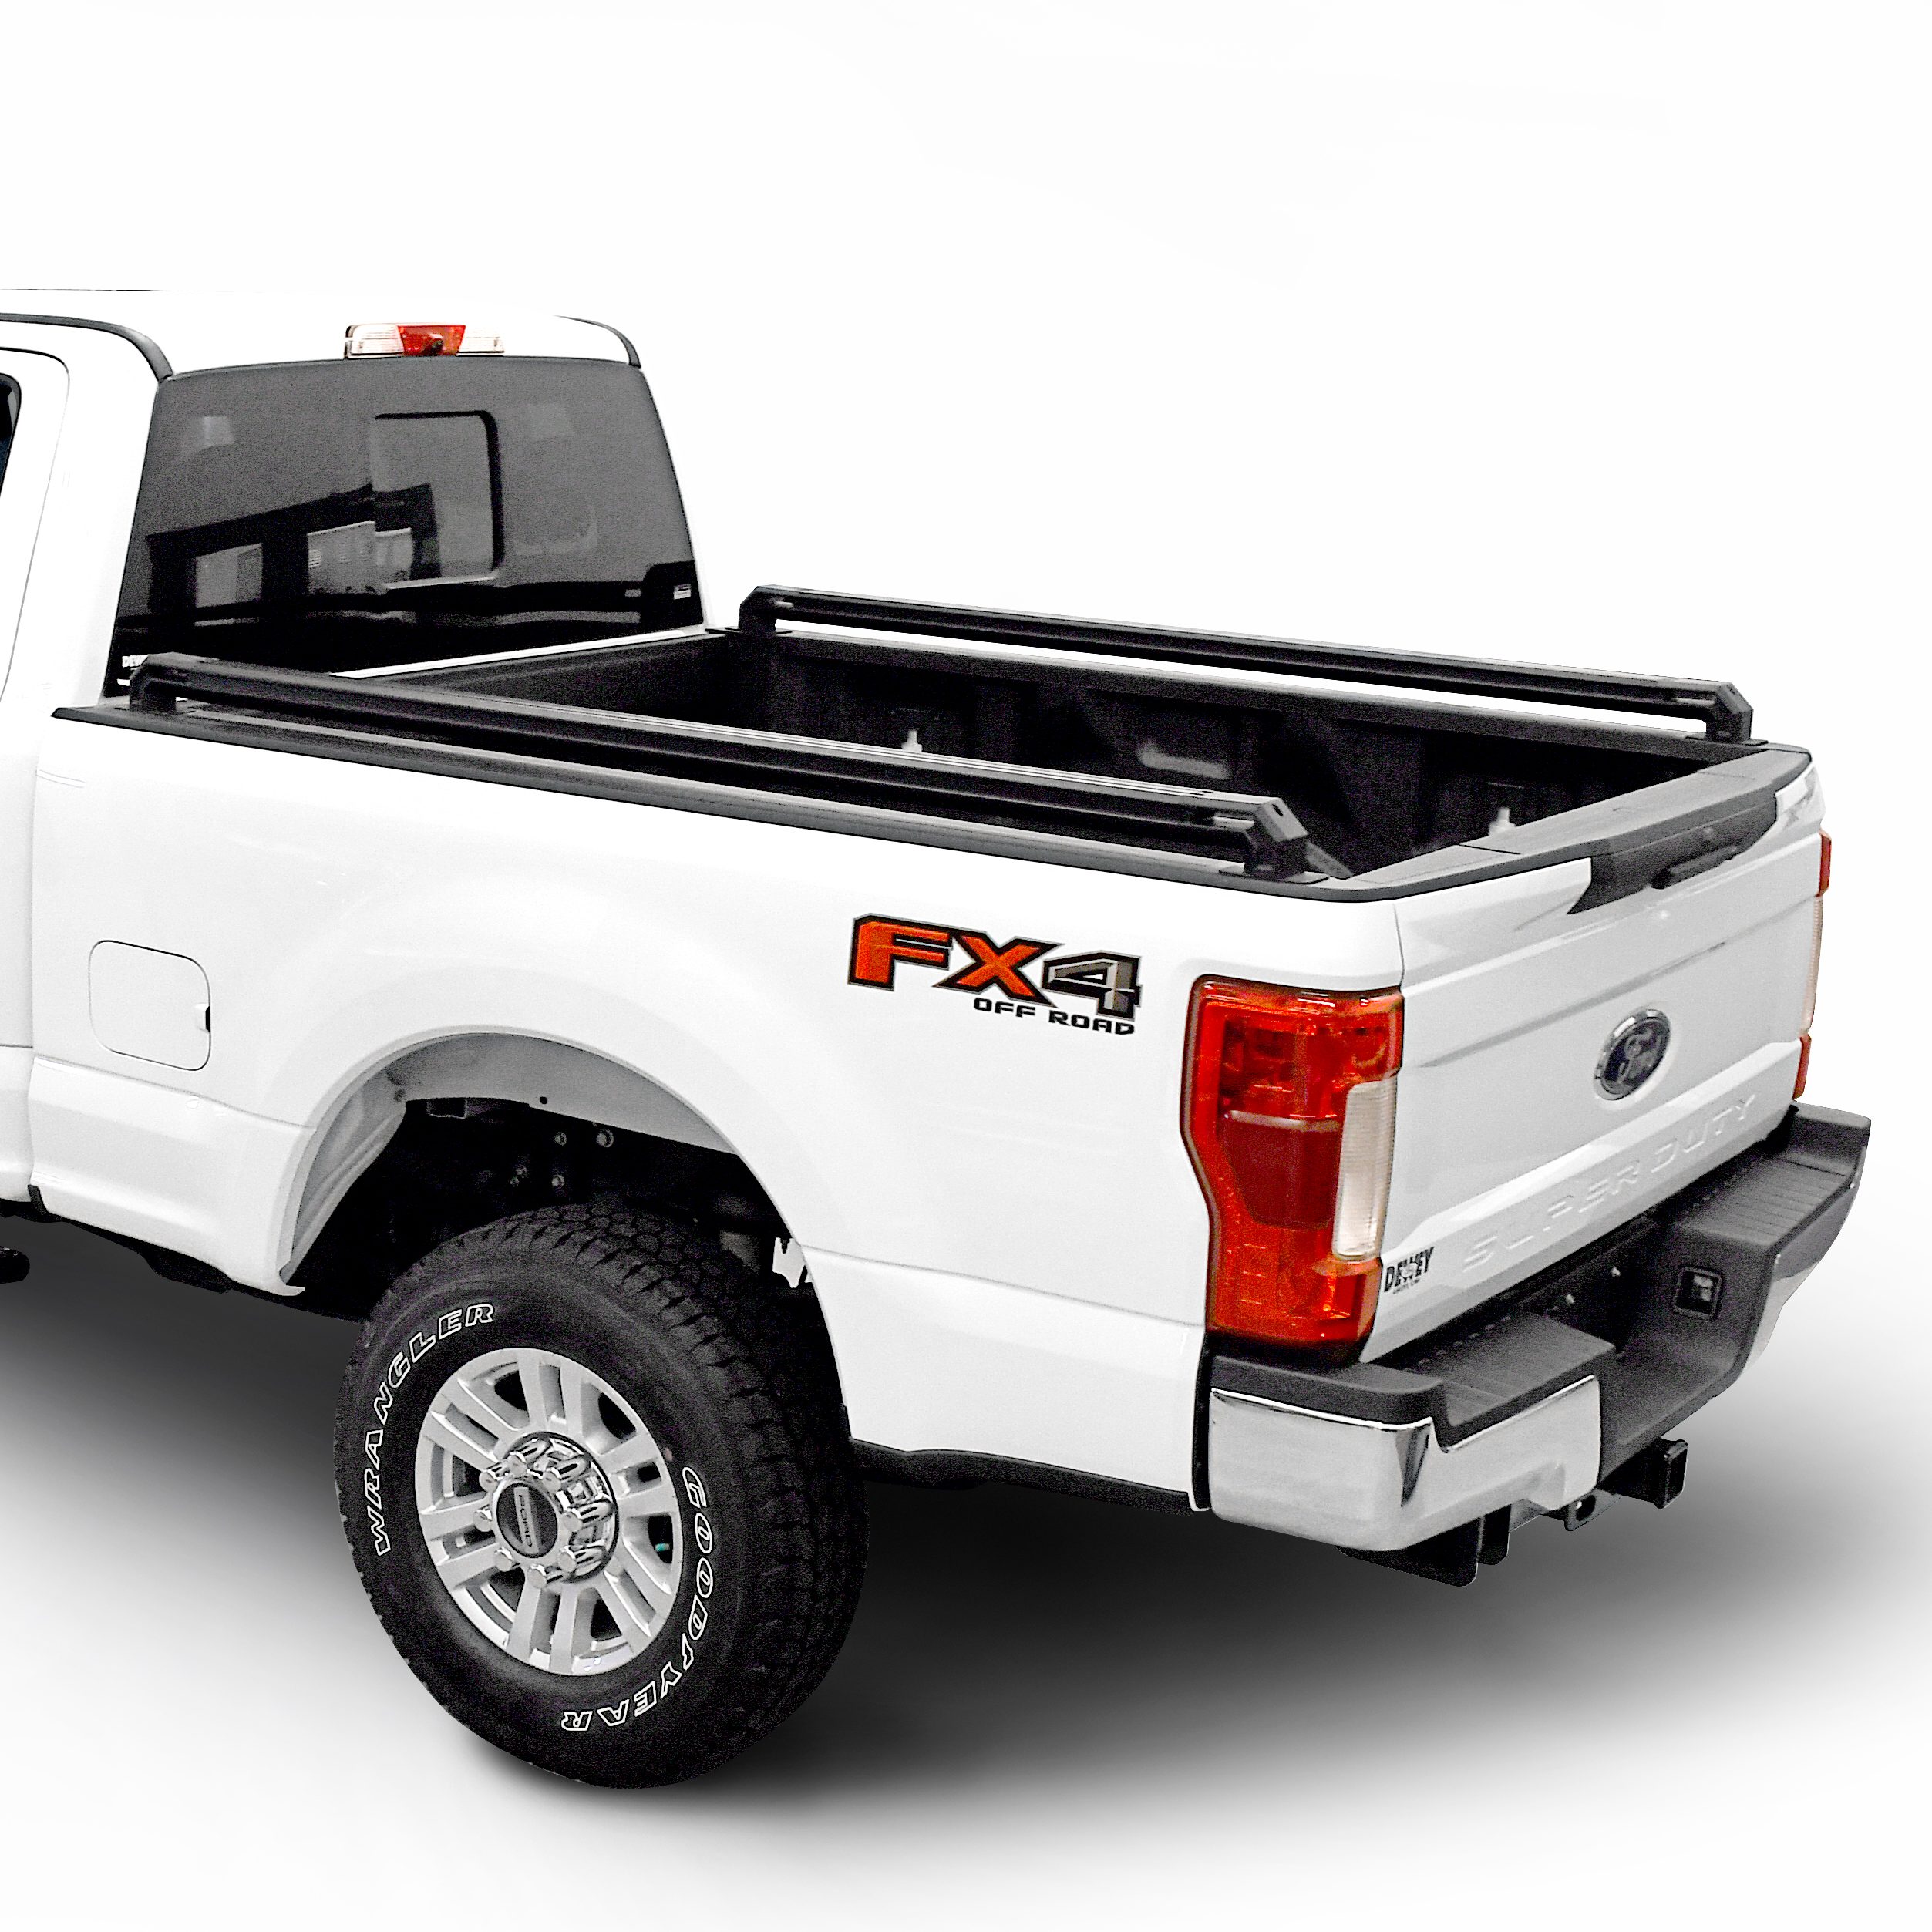 Putco Ultimate HD Truck Bed Rack System